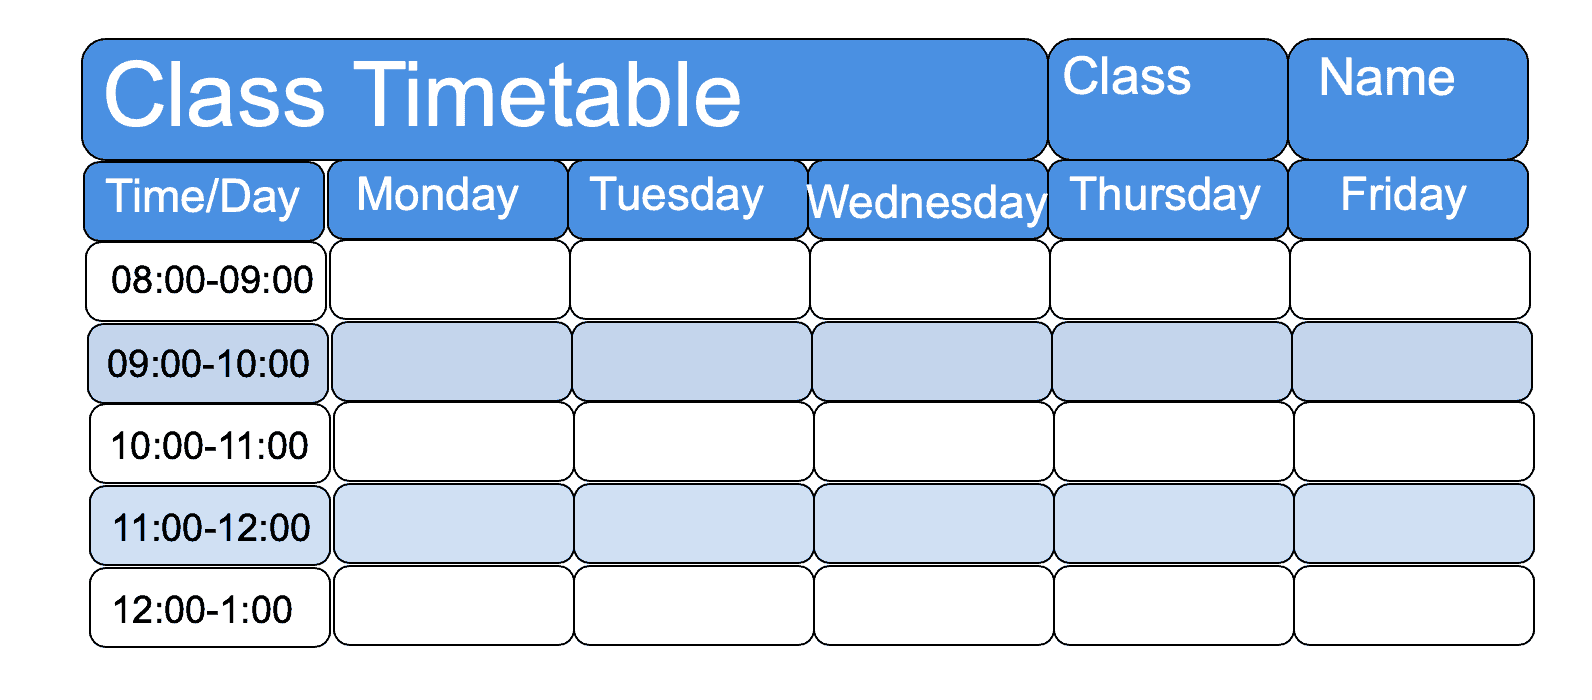 Example of a school timetable